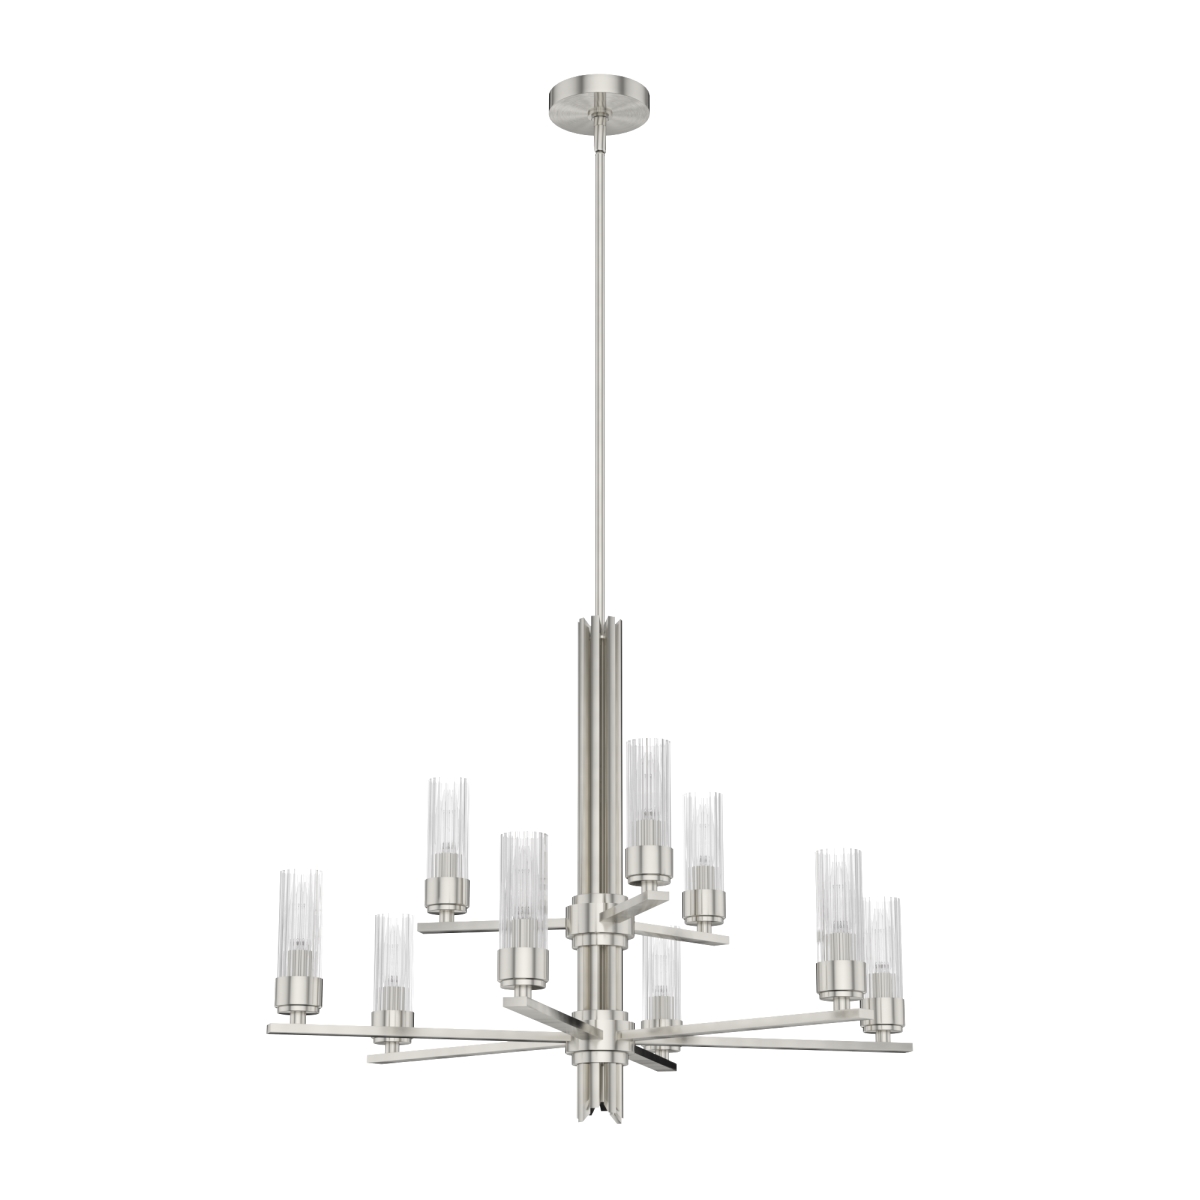 Hunter 19788 26.75 x 30 x 30 in. Gatz Brushed Nickel with Ribbed Glass 9 Light Chandelier Ceiling Light Fixture